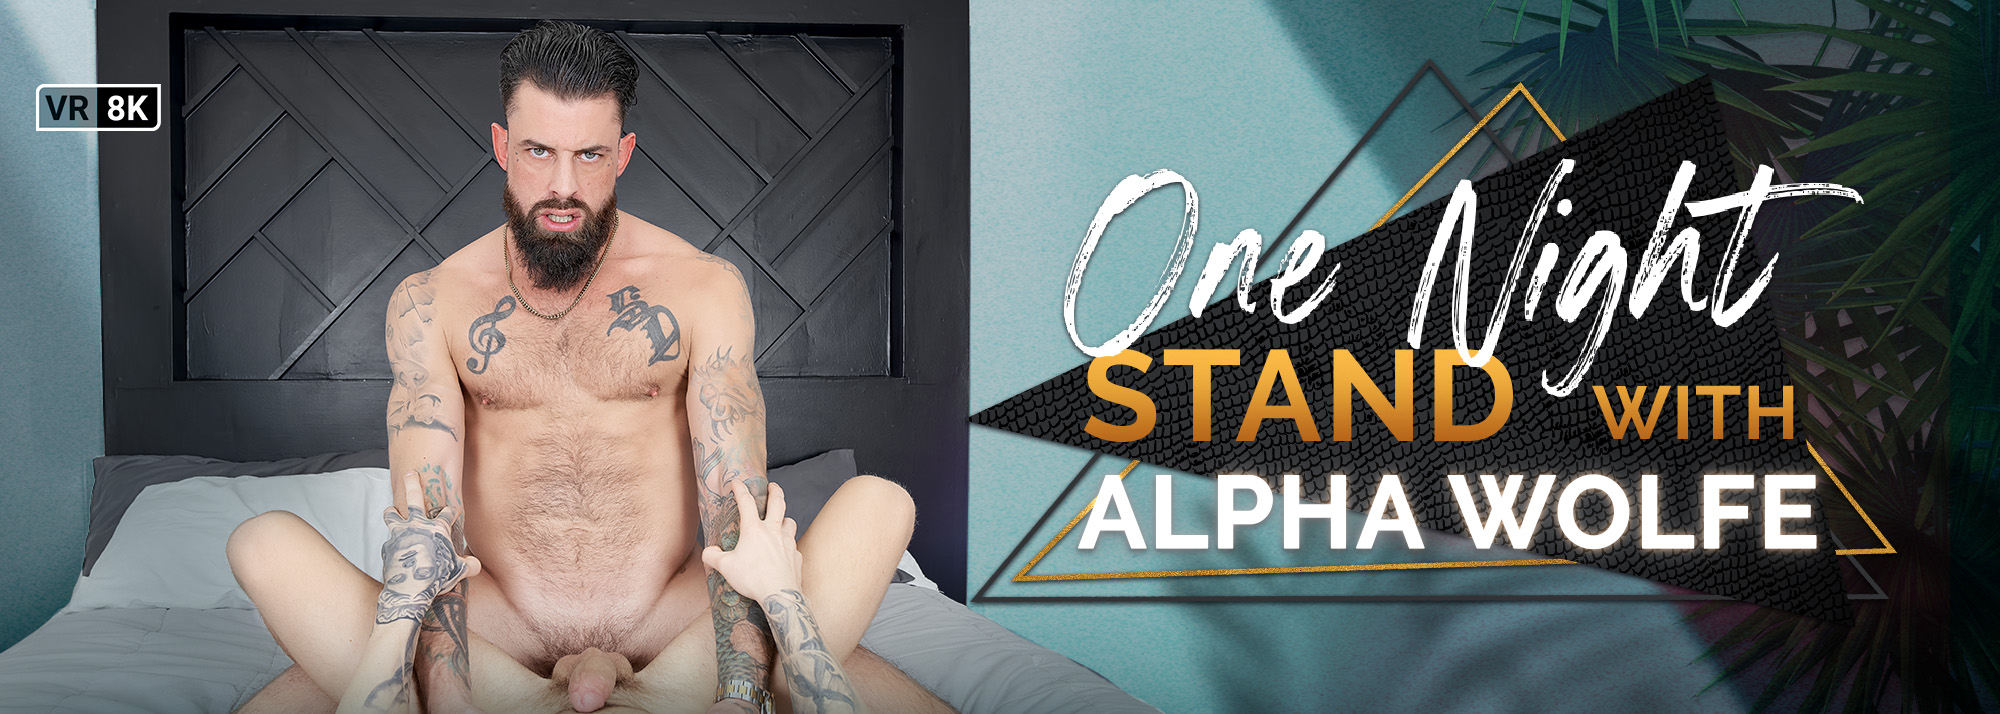 One Night Stand With Alpha Wolfe - Gay VR Porn Video, Starring: Alpha Wolfe